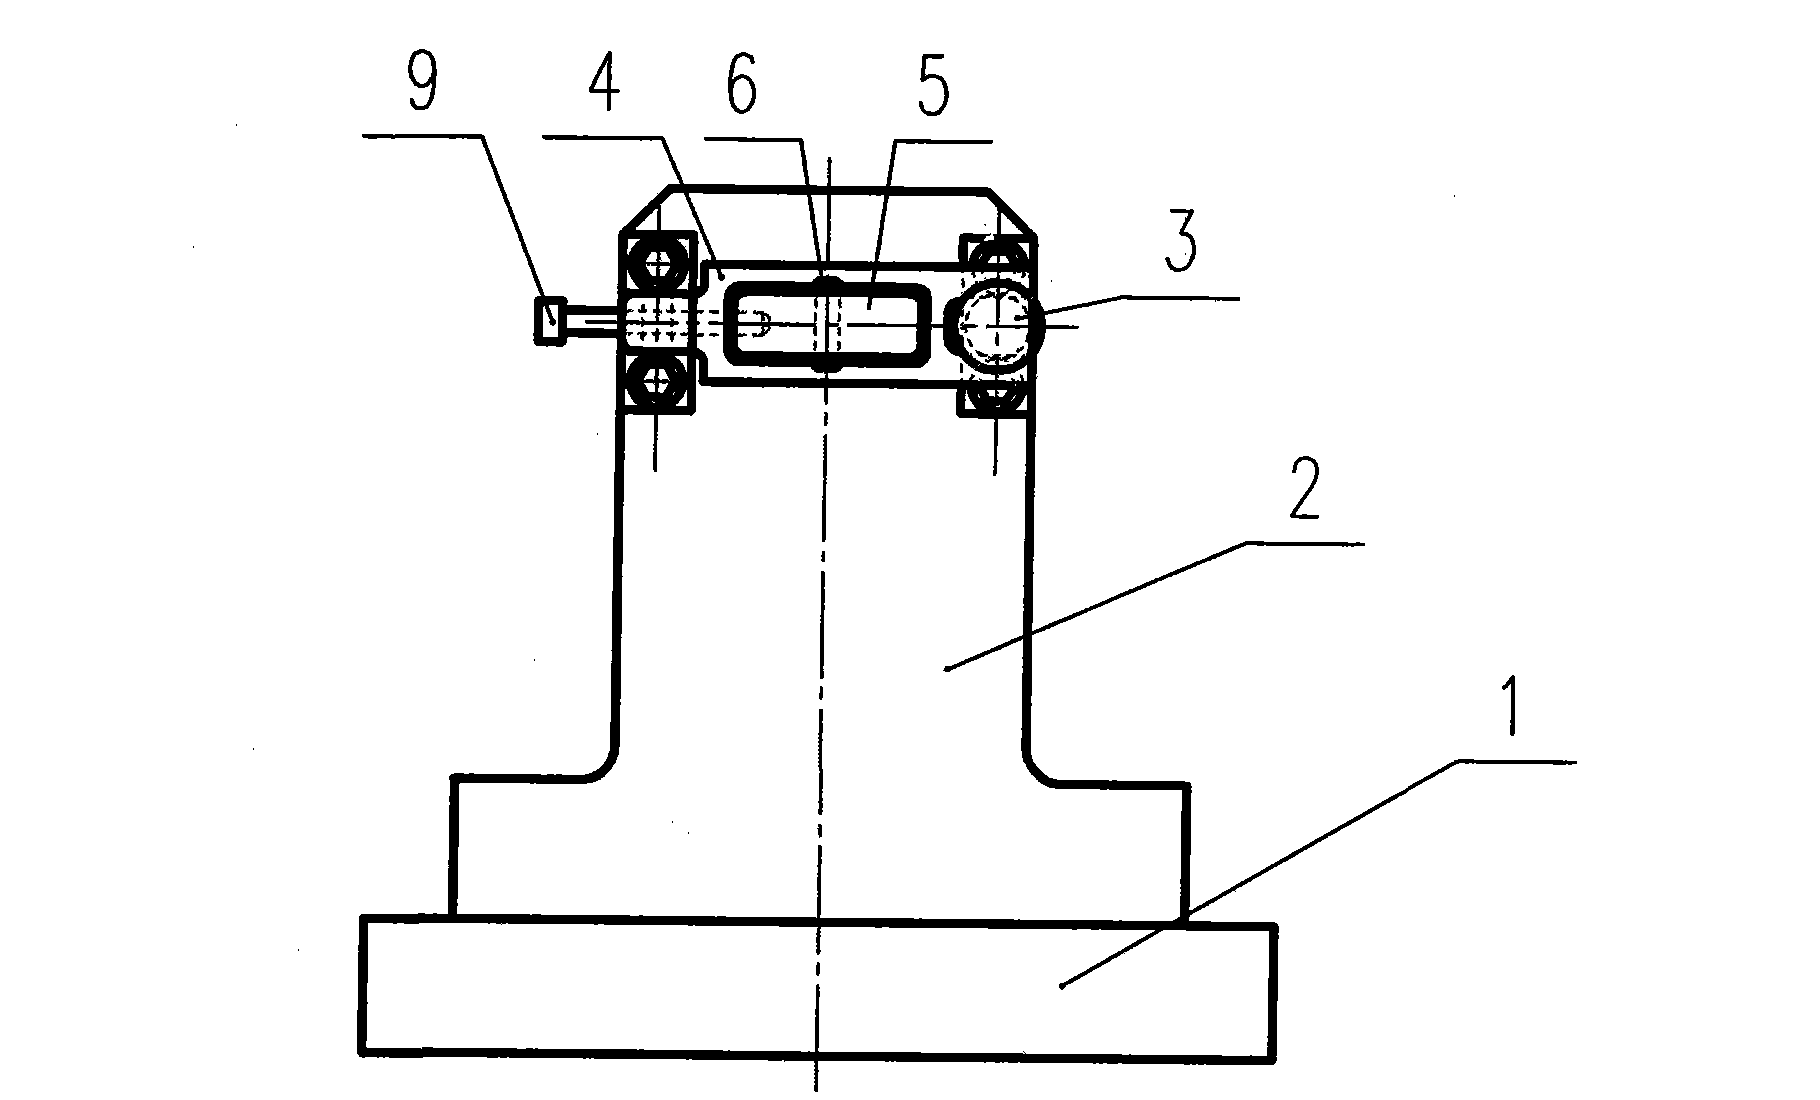 High-precision positioning fixture